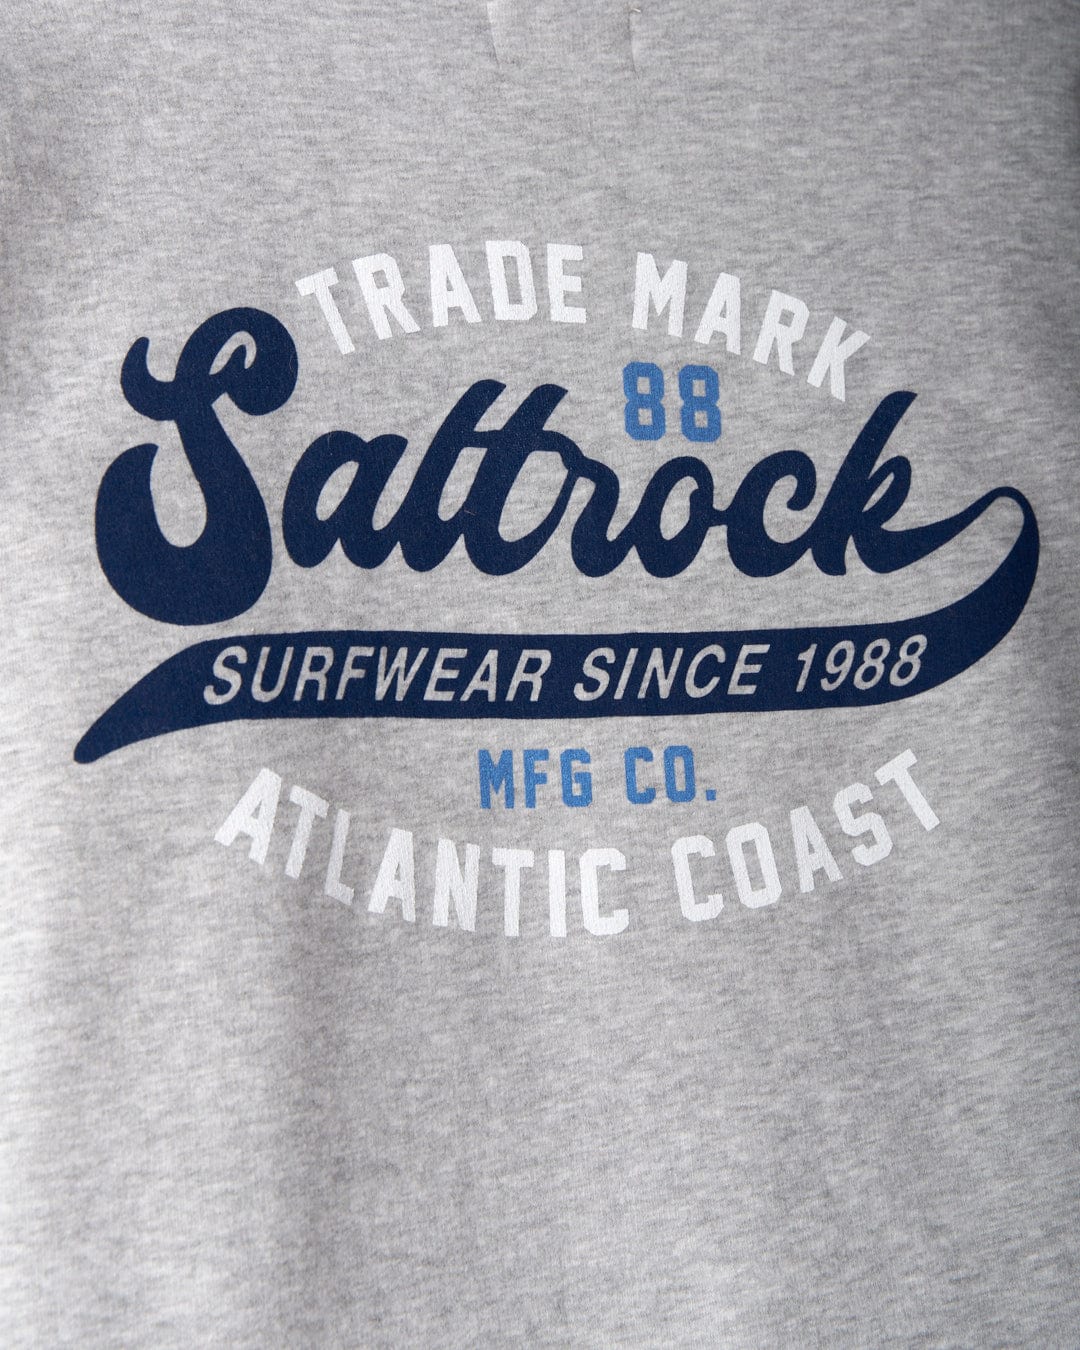 Close-up of a grey color **Home Run - Mens Zip Hoodie** with the text "Saltrock Surfwear Since 1988 Atlantic Coast" and "Trade Mark MFG CO" printed in blue and white.